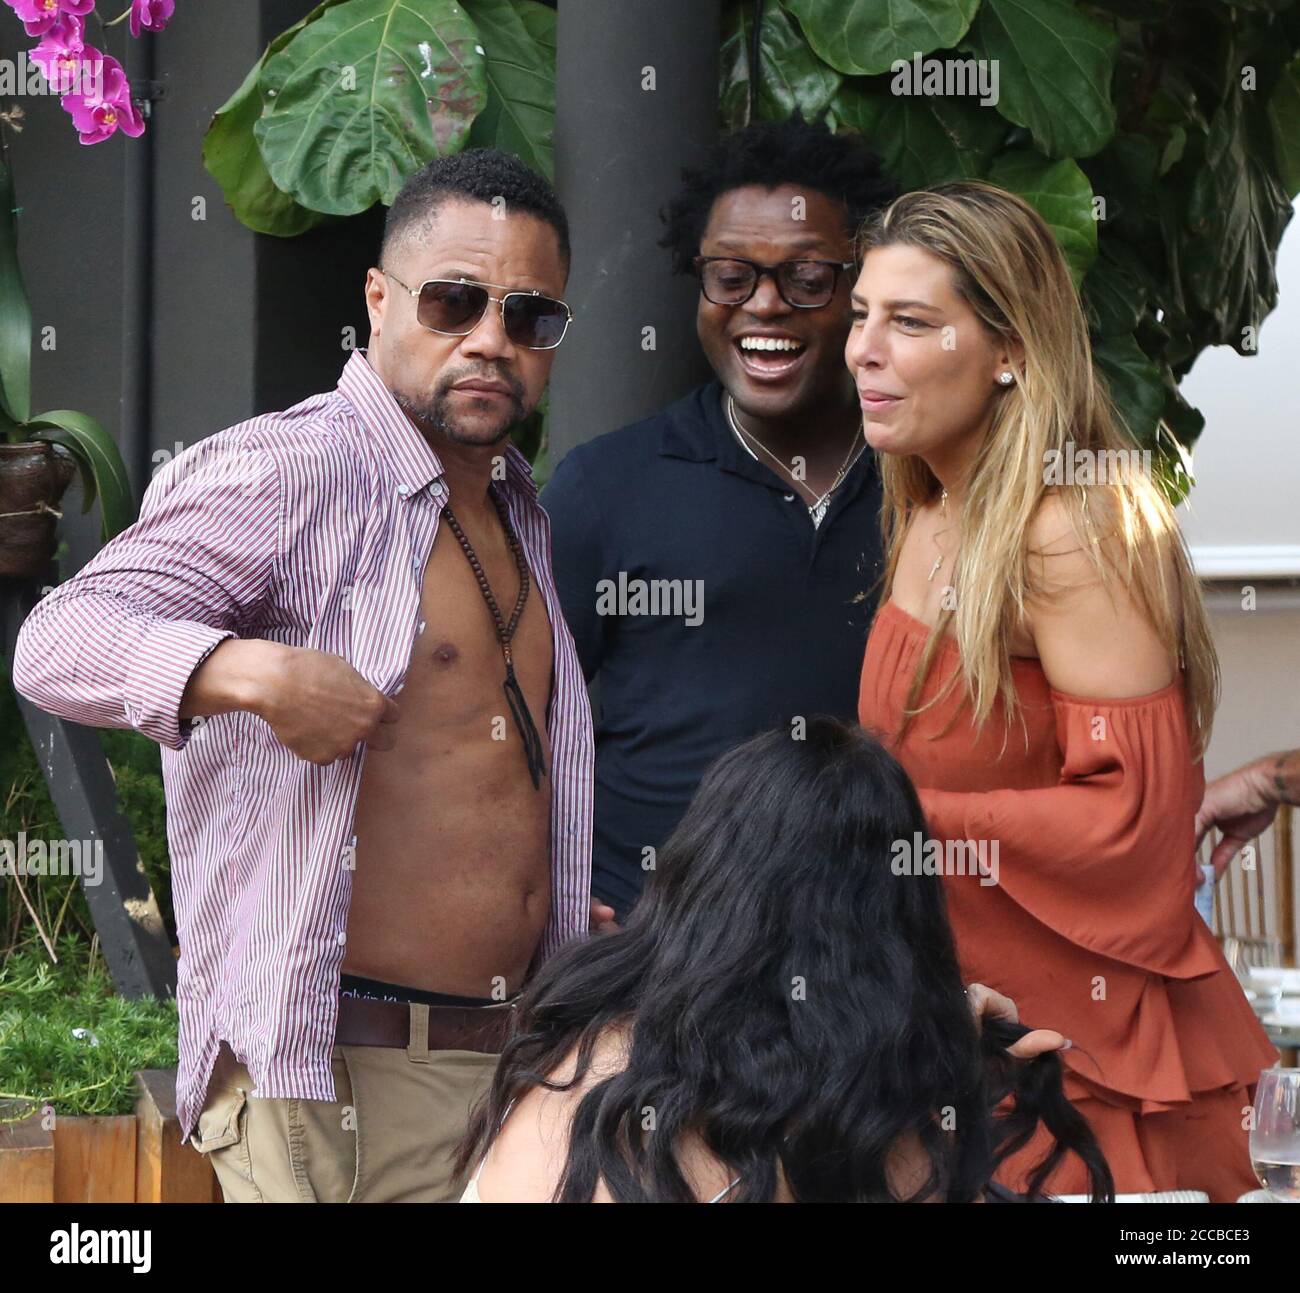 Miami, United States Of America. 17th Mar, 2019. MIAMI GARDENS, FL - MARCH 17: Robert De Niro's son's estranged wife is 'hooking up' with Cuba Gooding Jr. as seen at Seaspice Resaurant on March 17, 2019 in Miami, Florida. People: Cuba Gooding Jr Credit: Storms Media Group/Alamy Live News Stock Photo